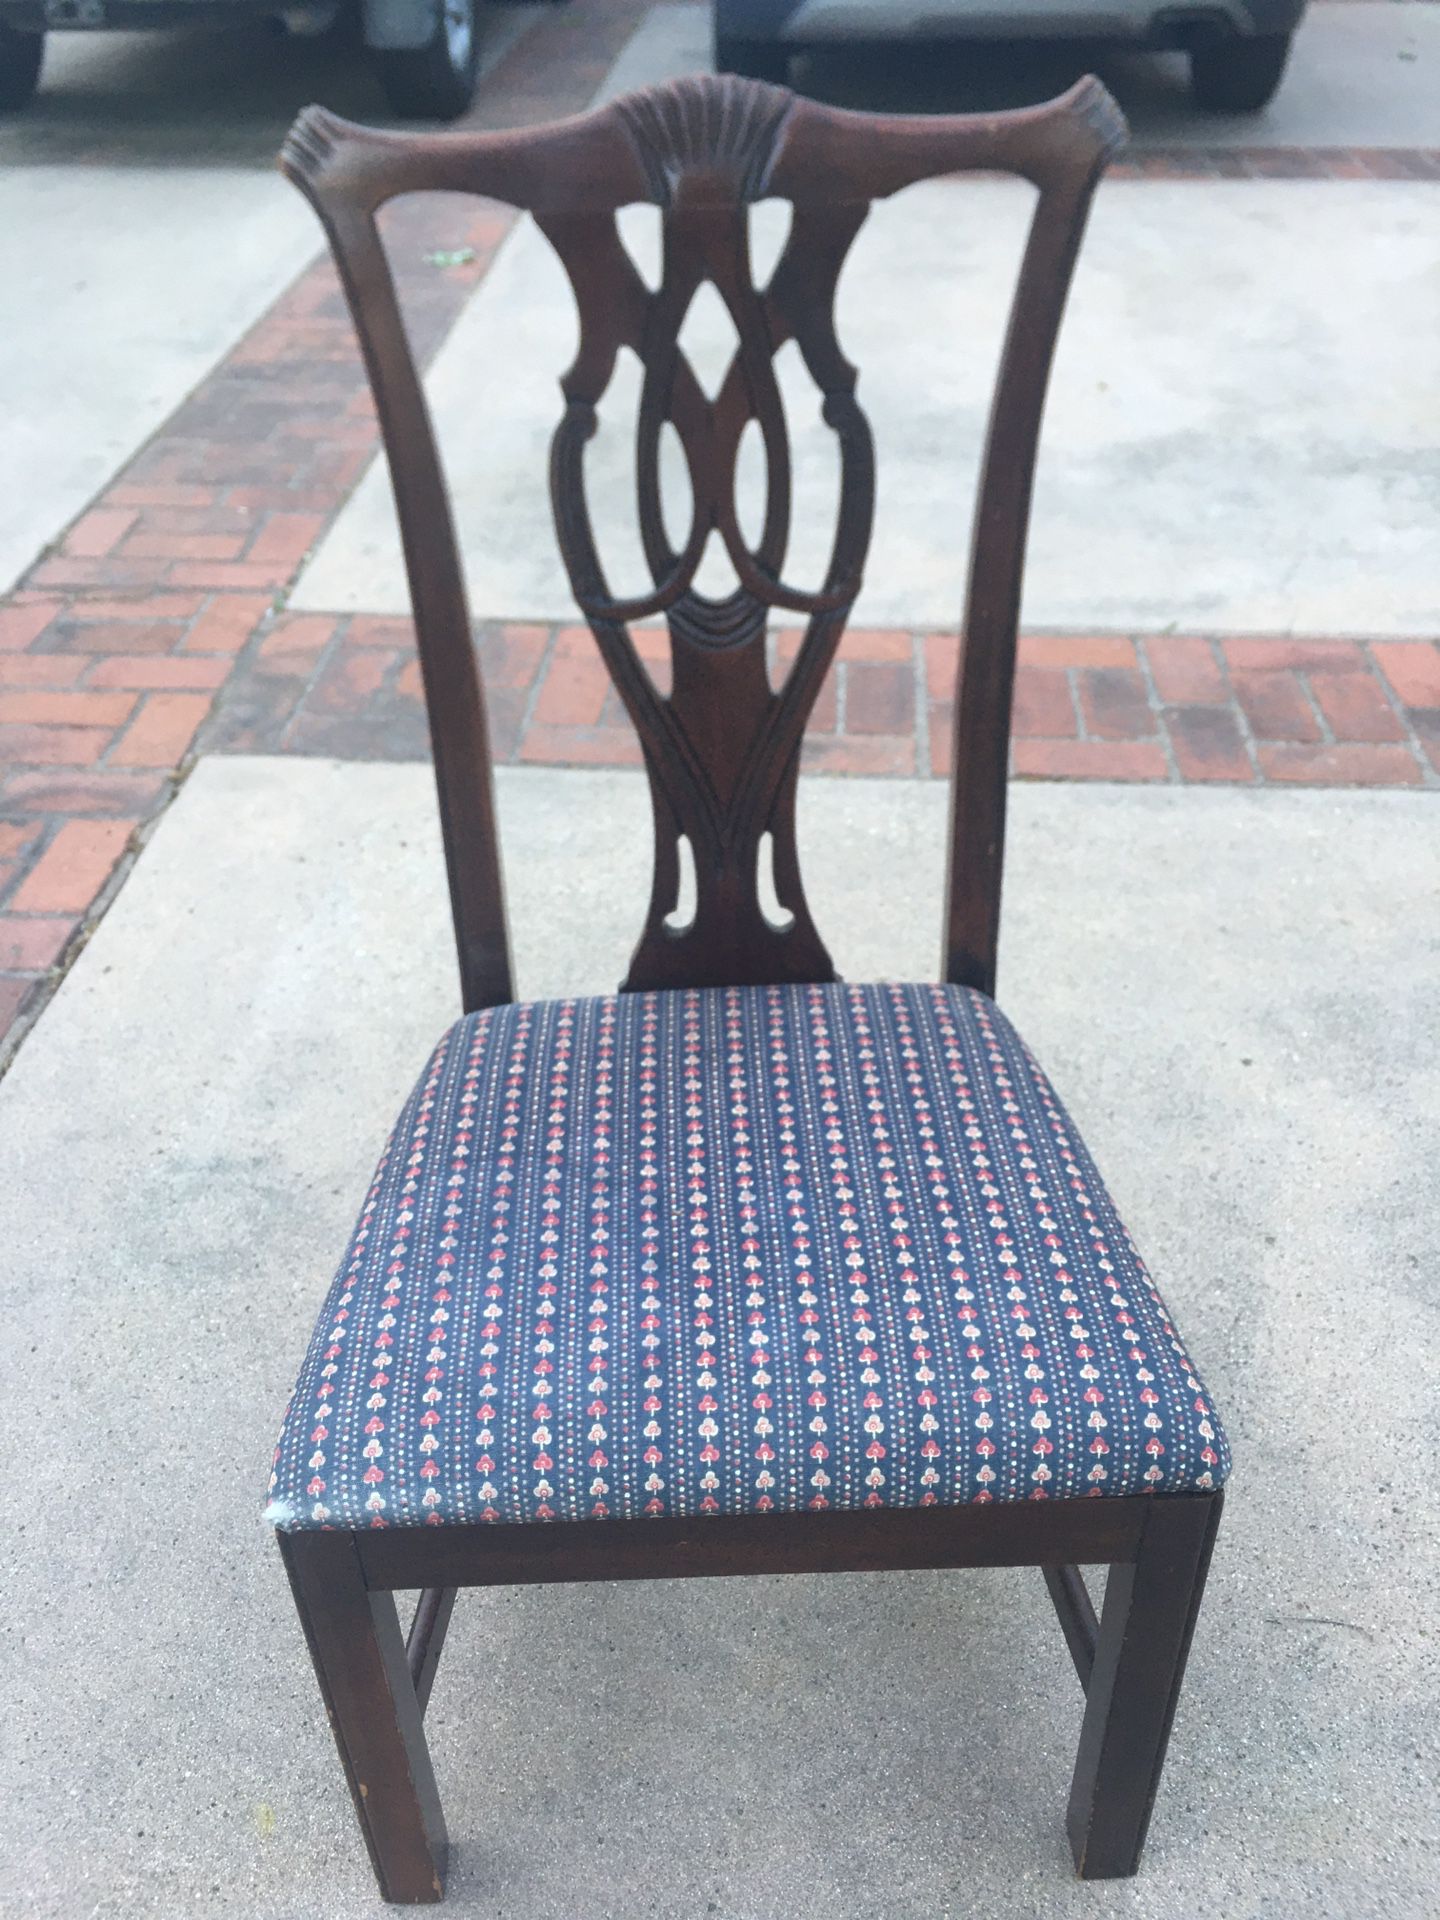 WOODEN DESK CHAIR WITH BLUE PATTERN SEAT